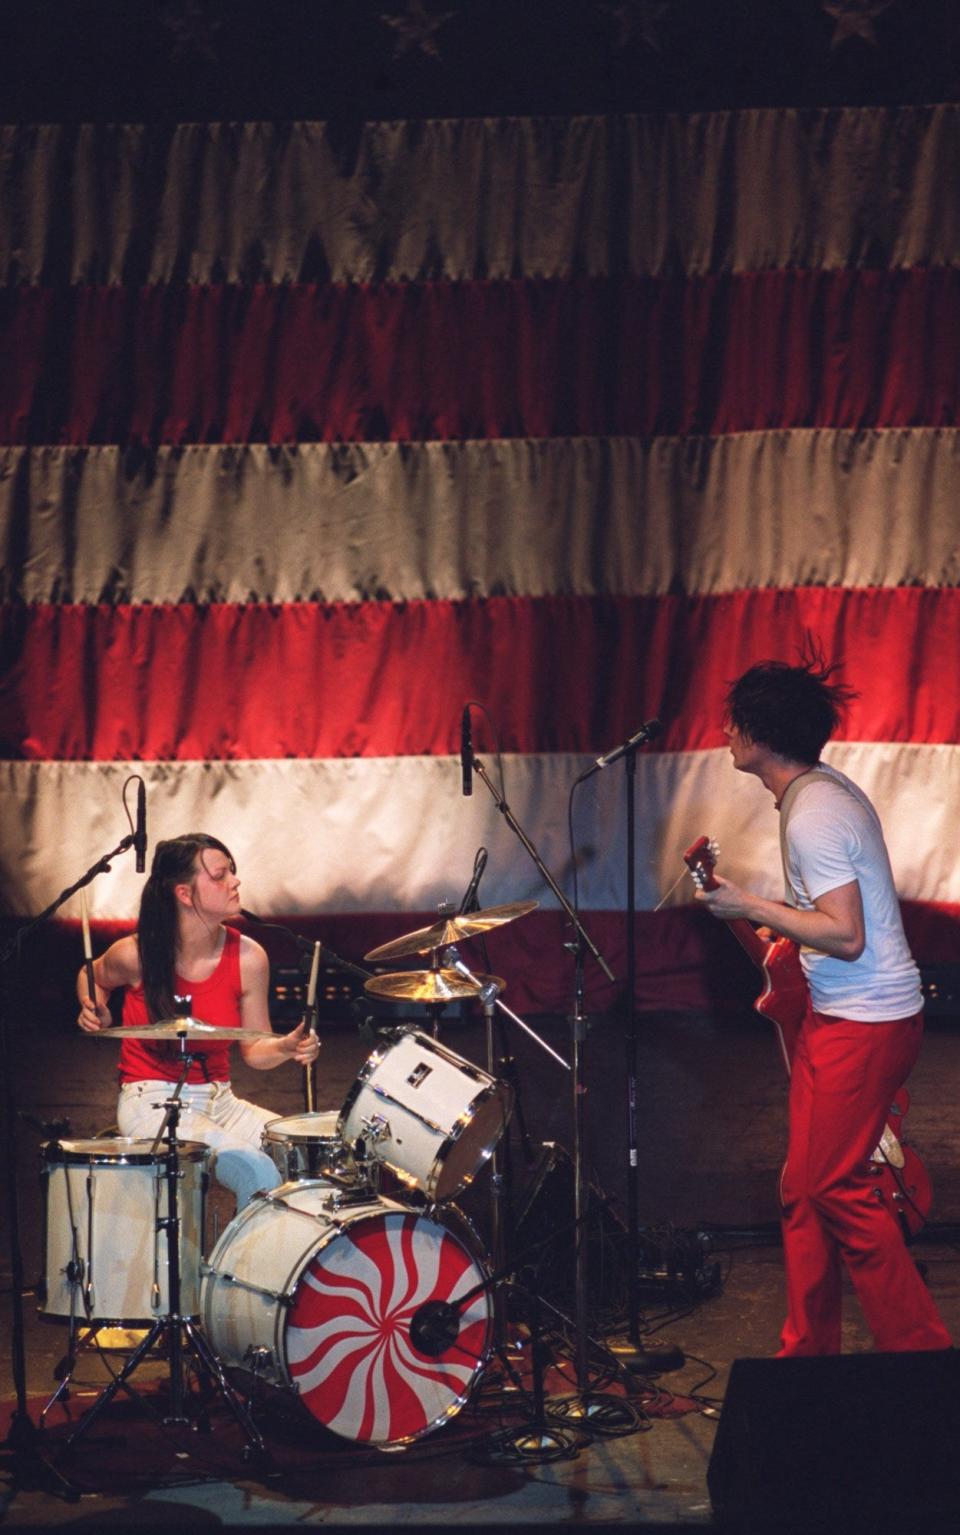 Meg White, left, and Jack White of the native Detroit rock band The White Stripes perform the first of two sold-out shows Wednesday night, May 22, 2002, at the Royal Oak Theater in Royal Oak.